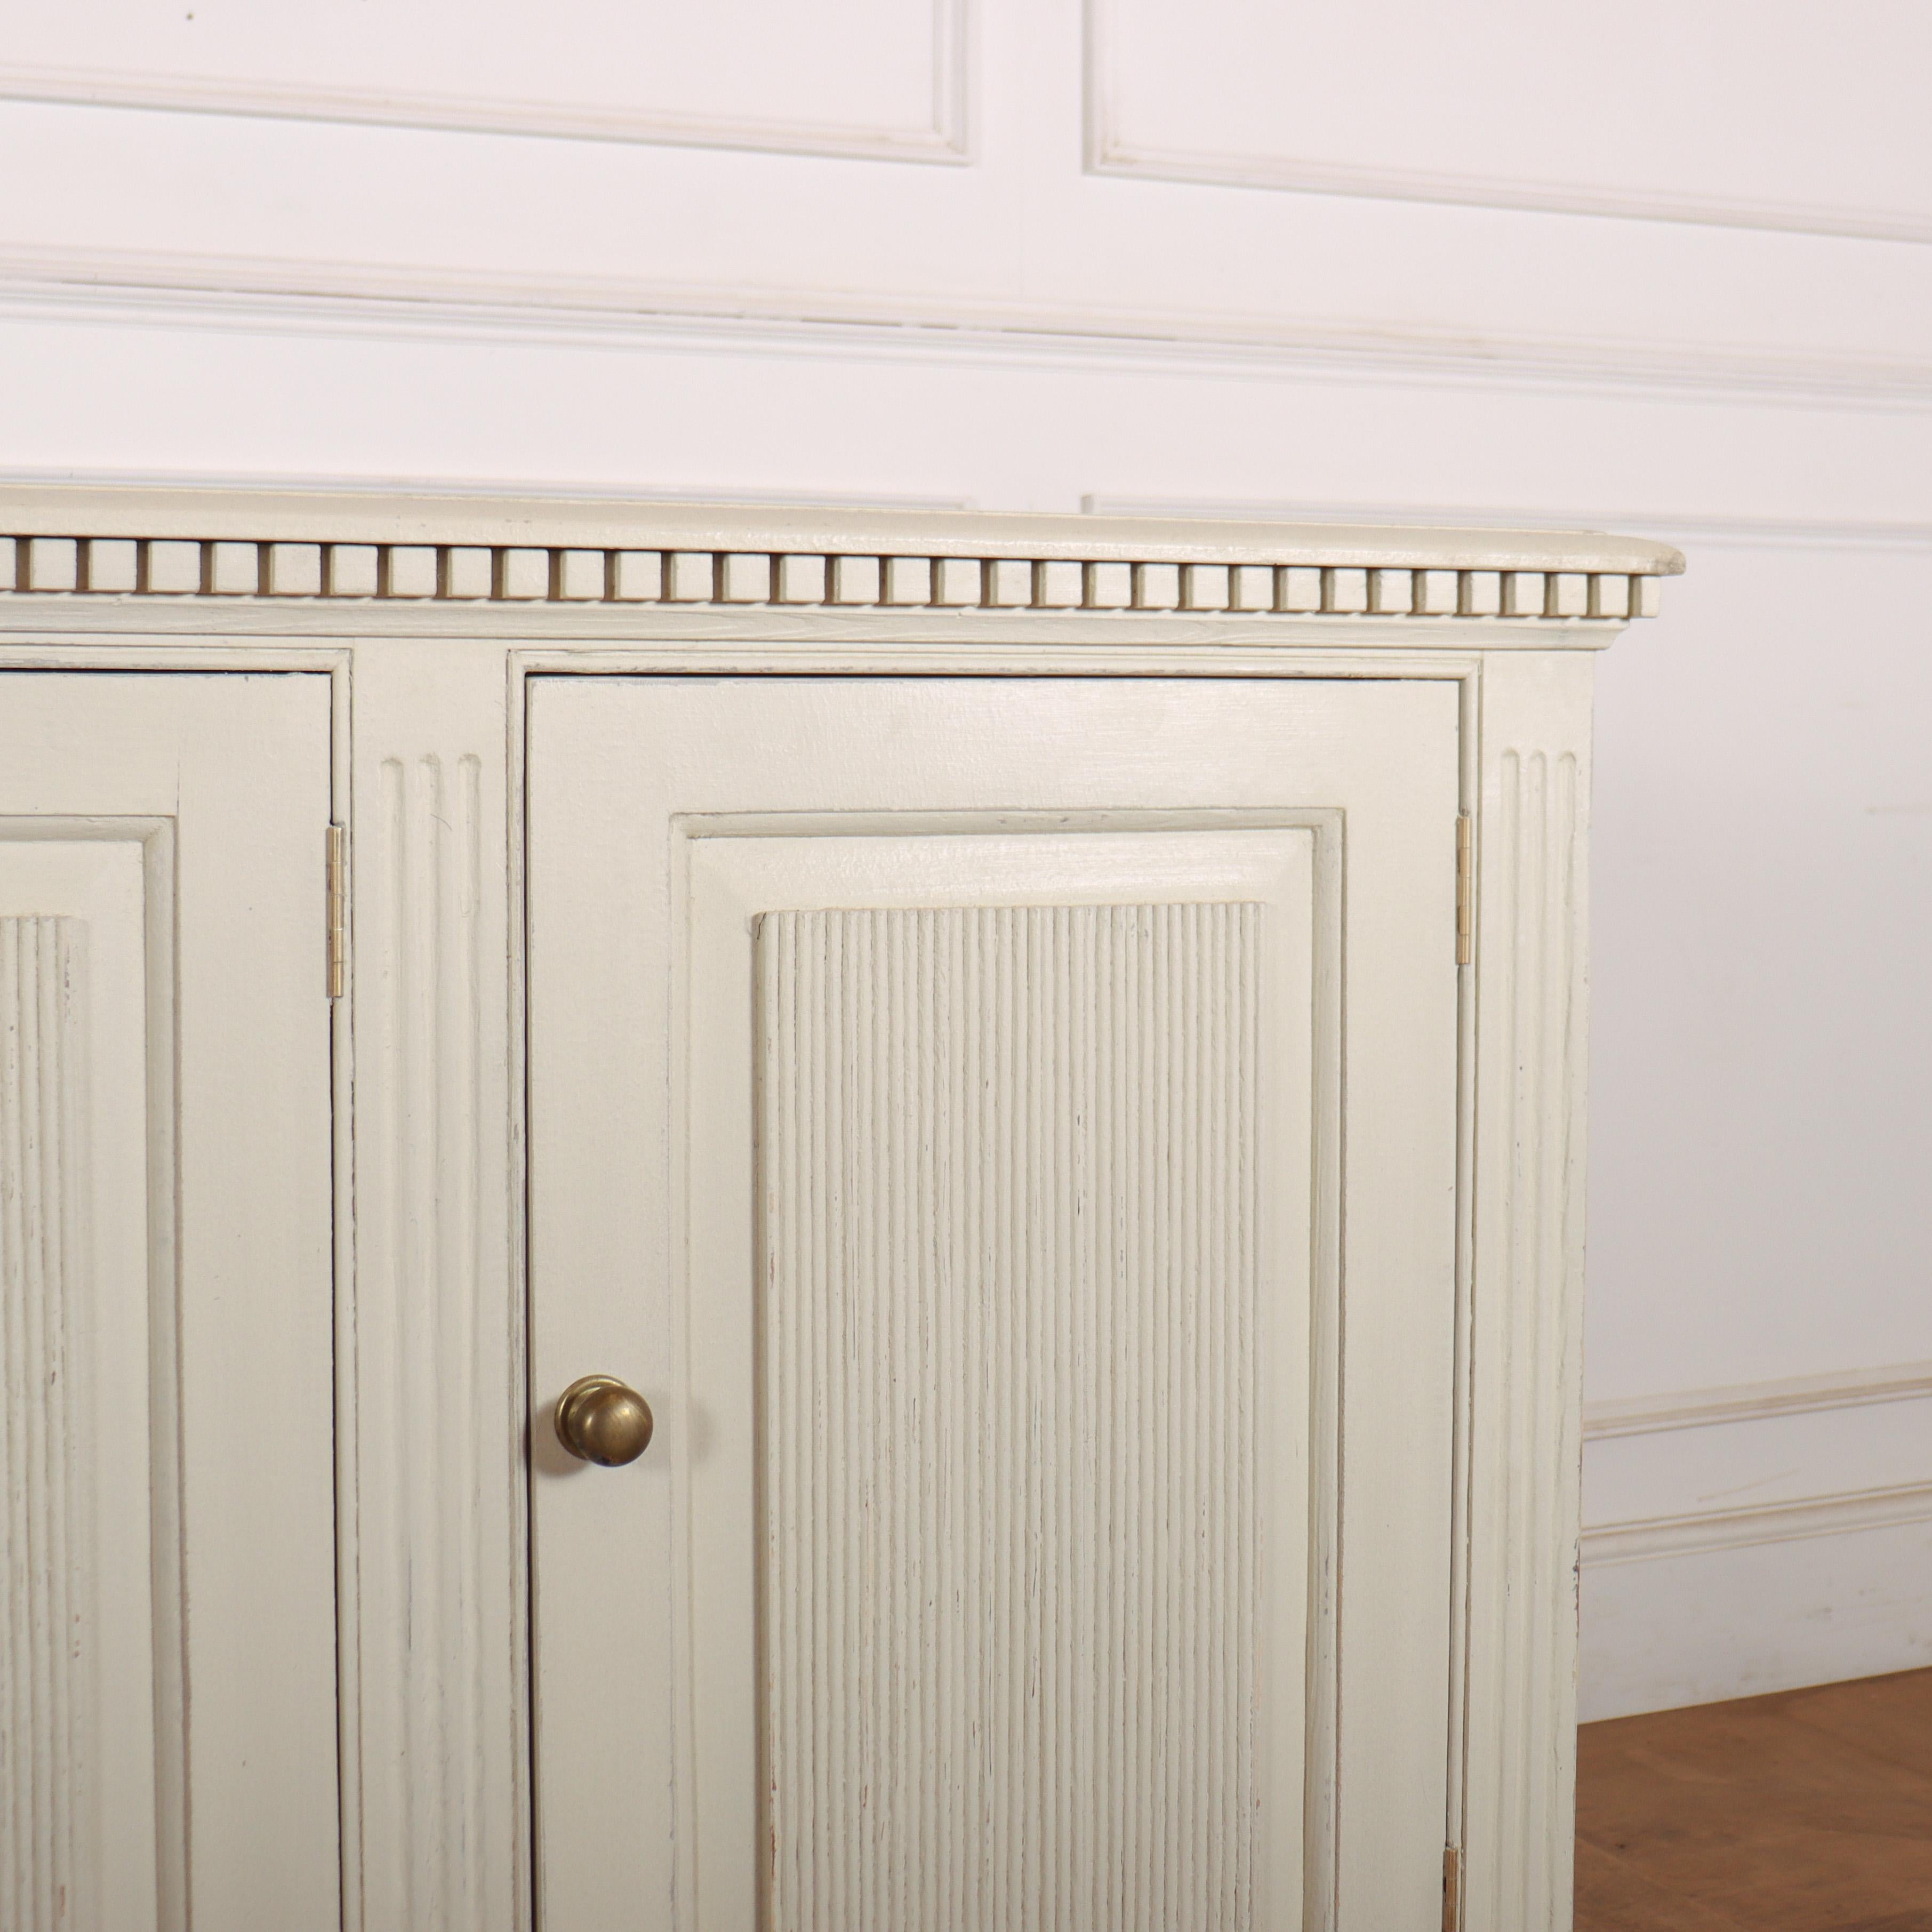 Custom made Swedish style four door enfilade. Can be made to your chosen paint colour and dimensions. Colour on enfilade pictured is F&B Shaded White.

Reference: 8371

Dimensions
80.5 inches (204 cms) Wide
20.5 inches (52 cms) Deep
37.5 inches (95